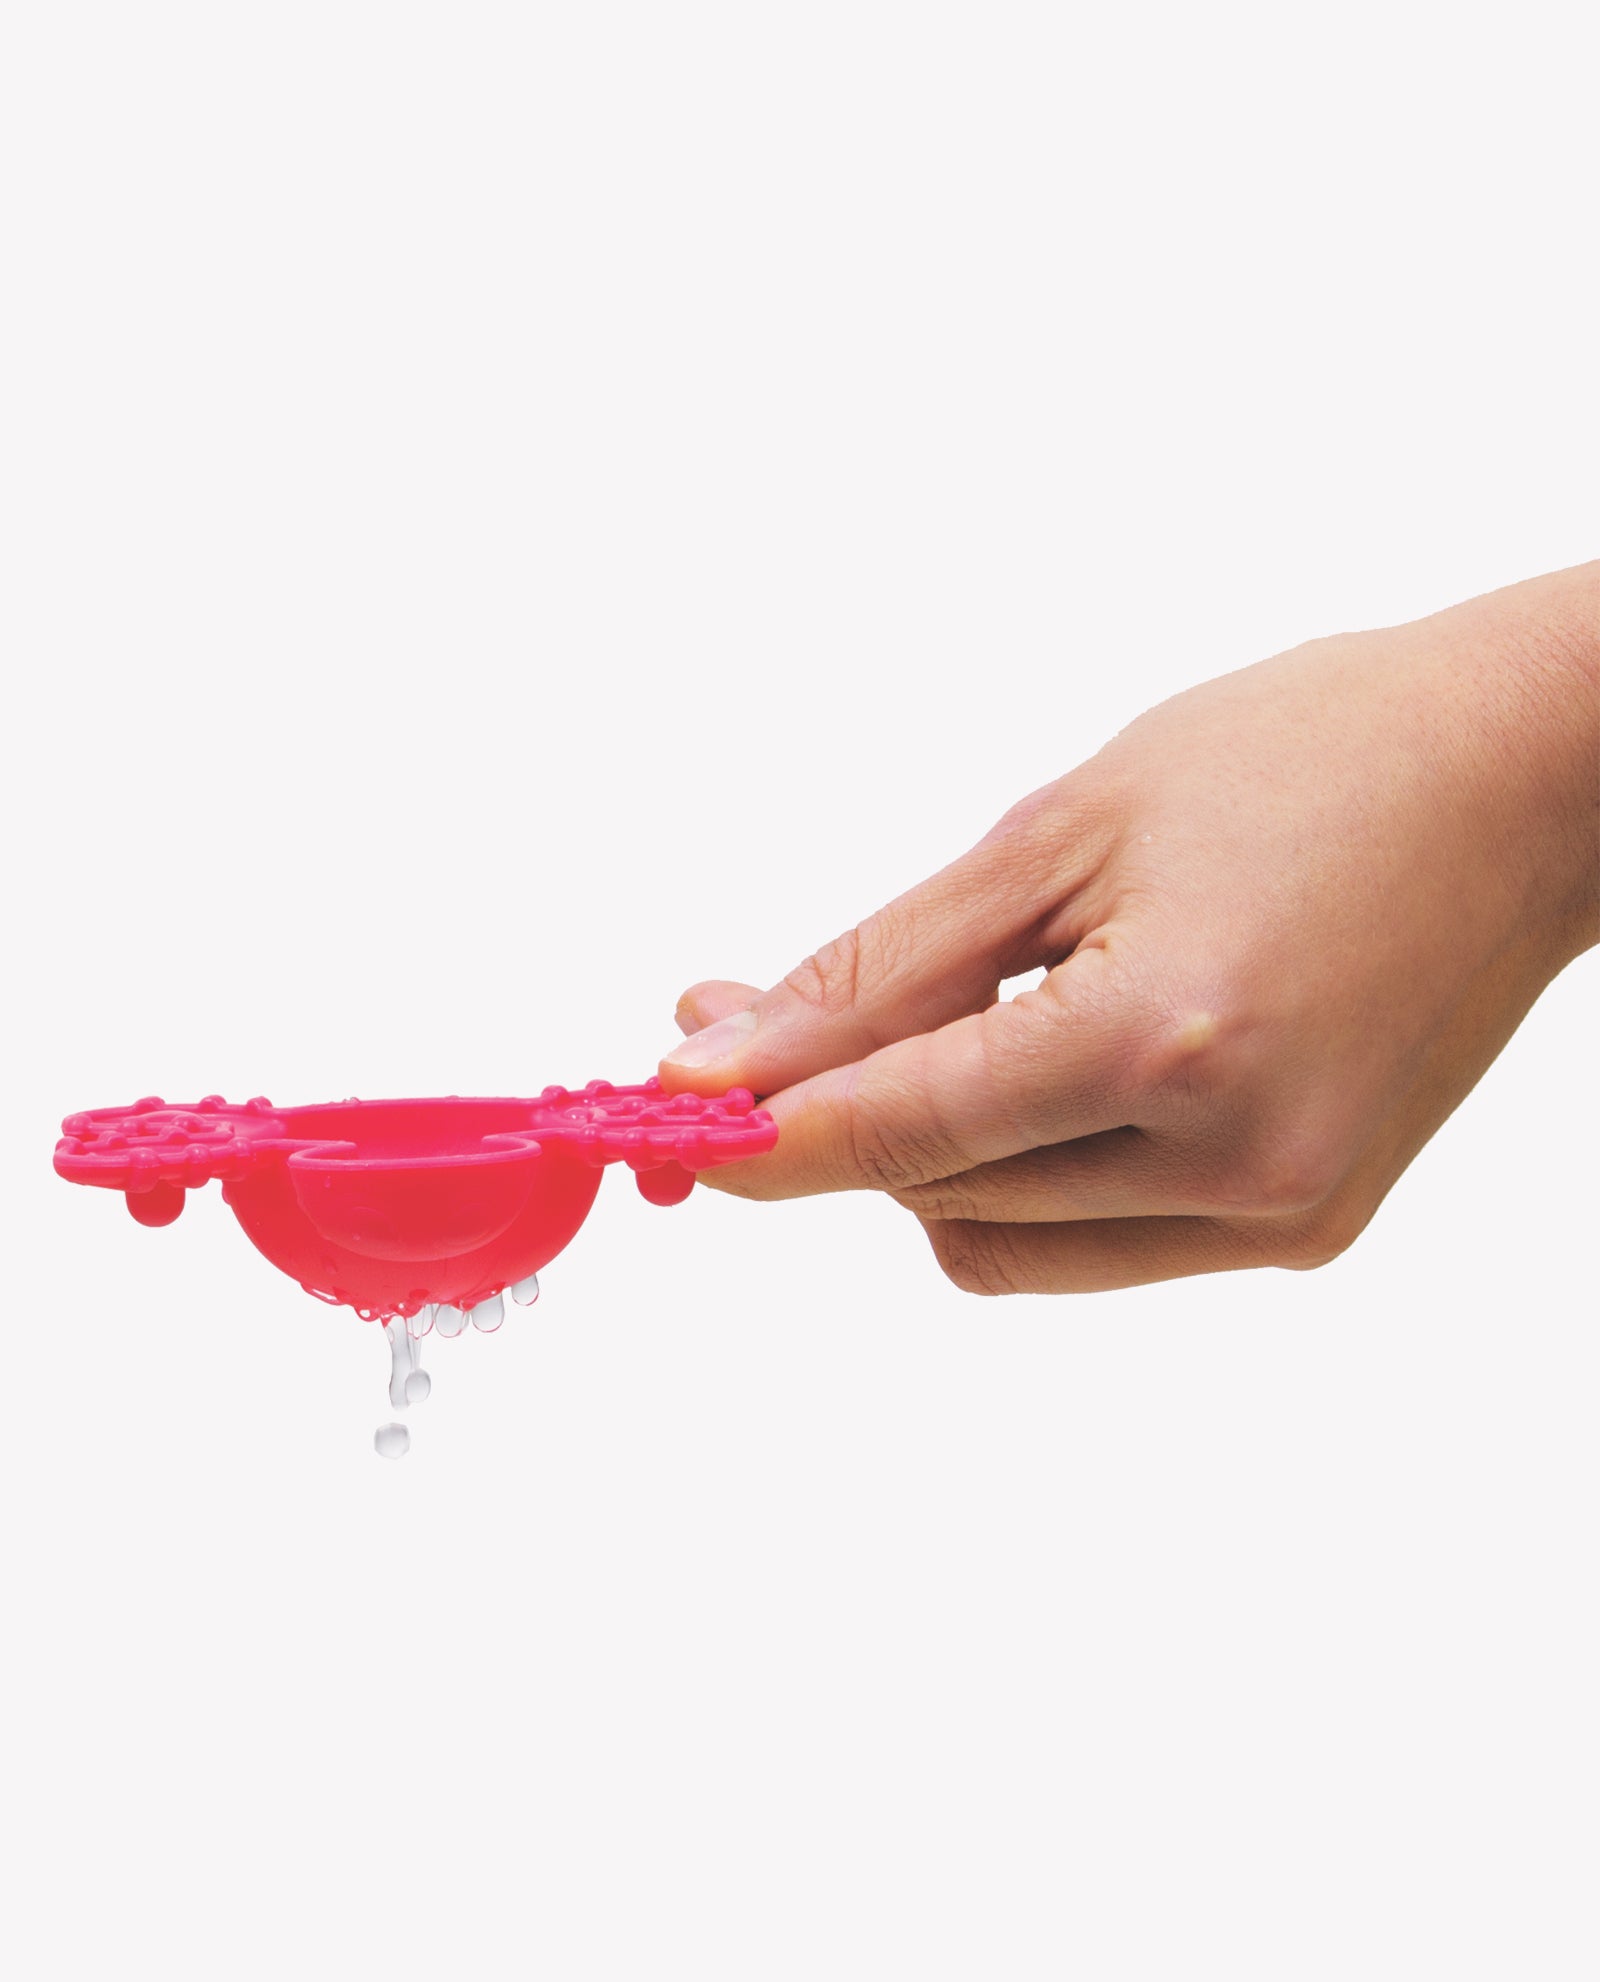 A hand holding red Playgro Scoop and Splash toy with water